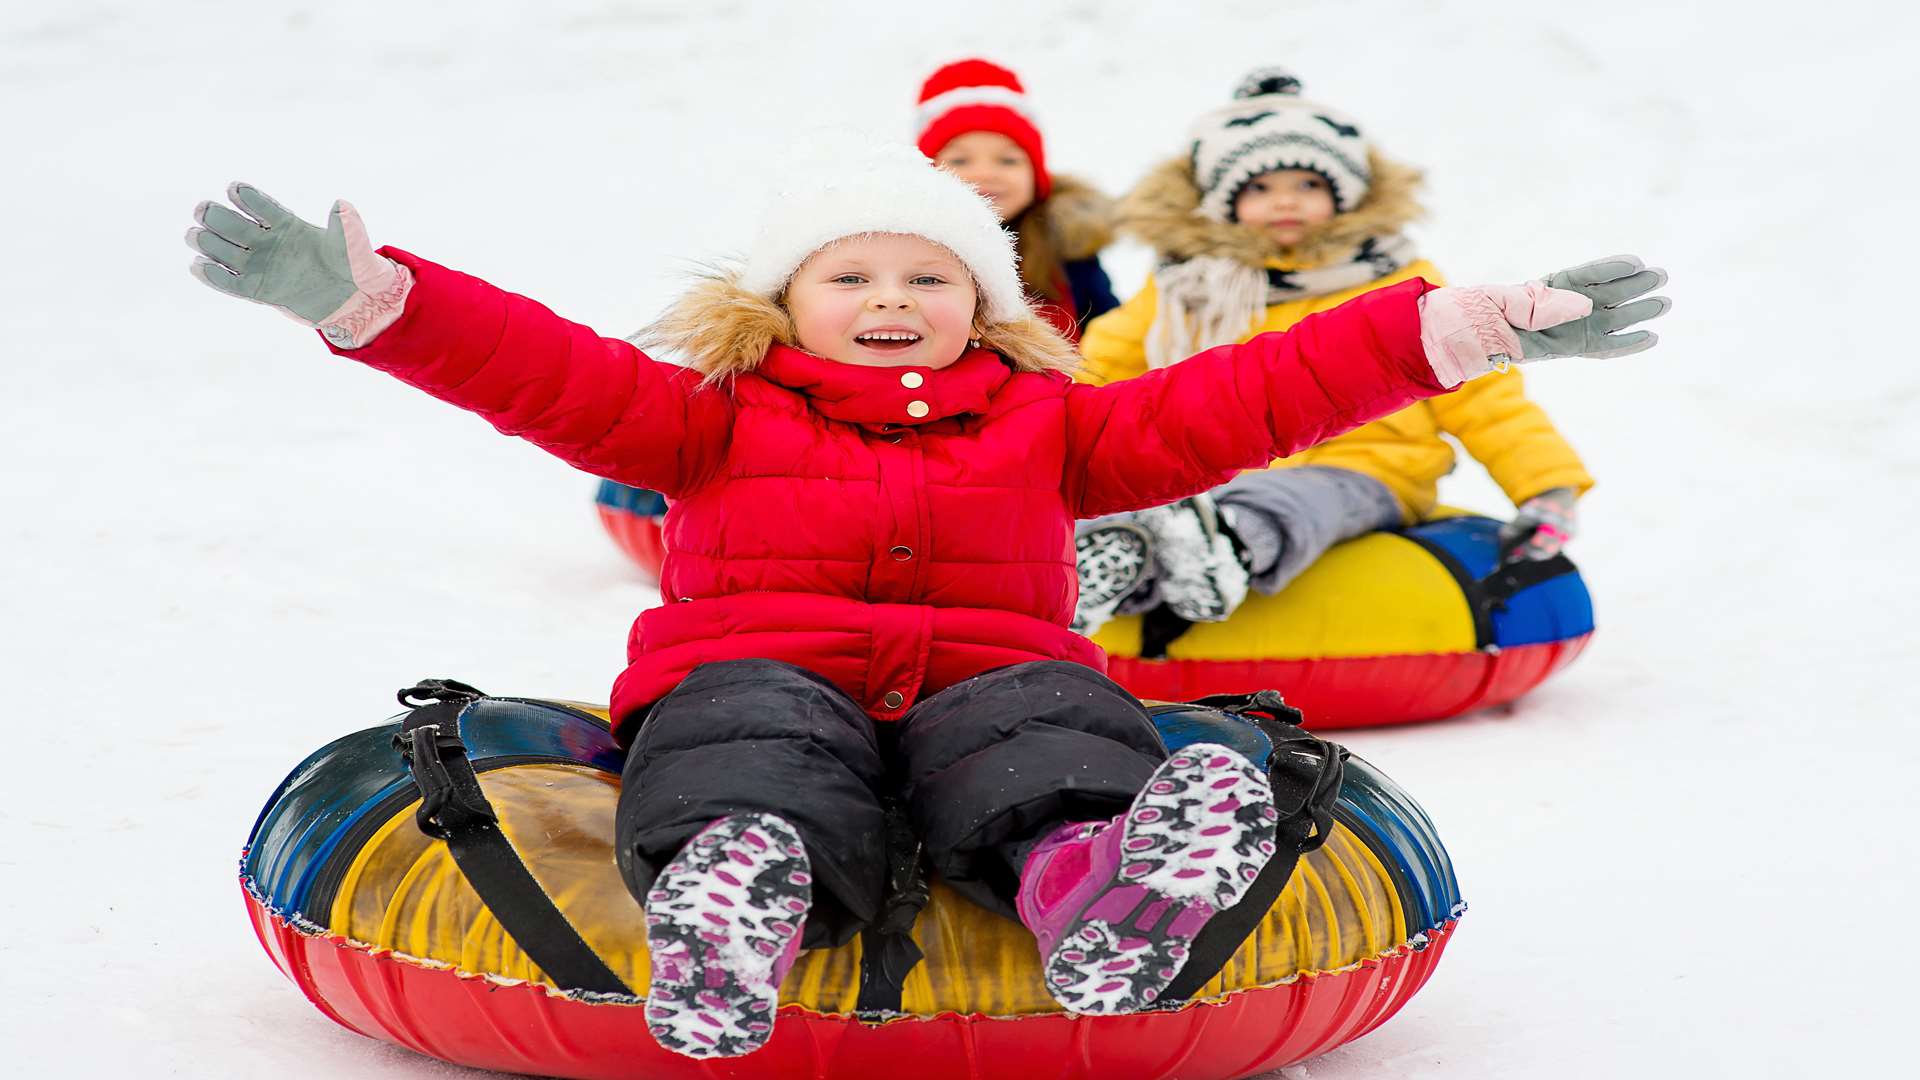 Experience snow tubing at Betteshanger Park this Christmas. Picture: © Shutterstock